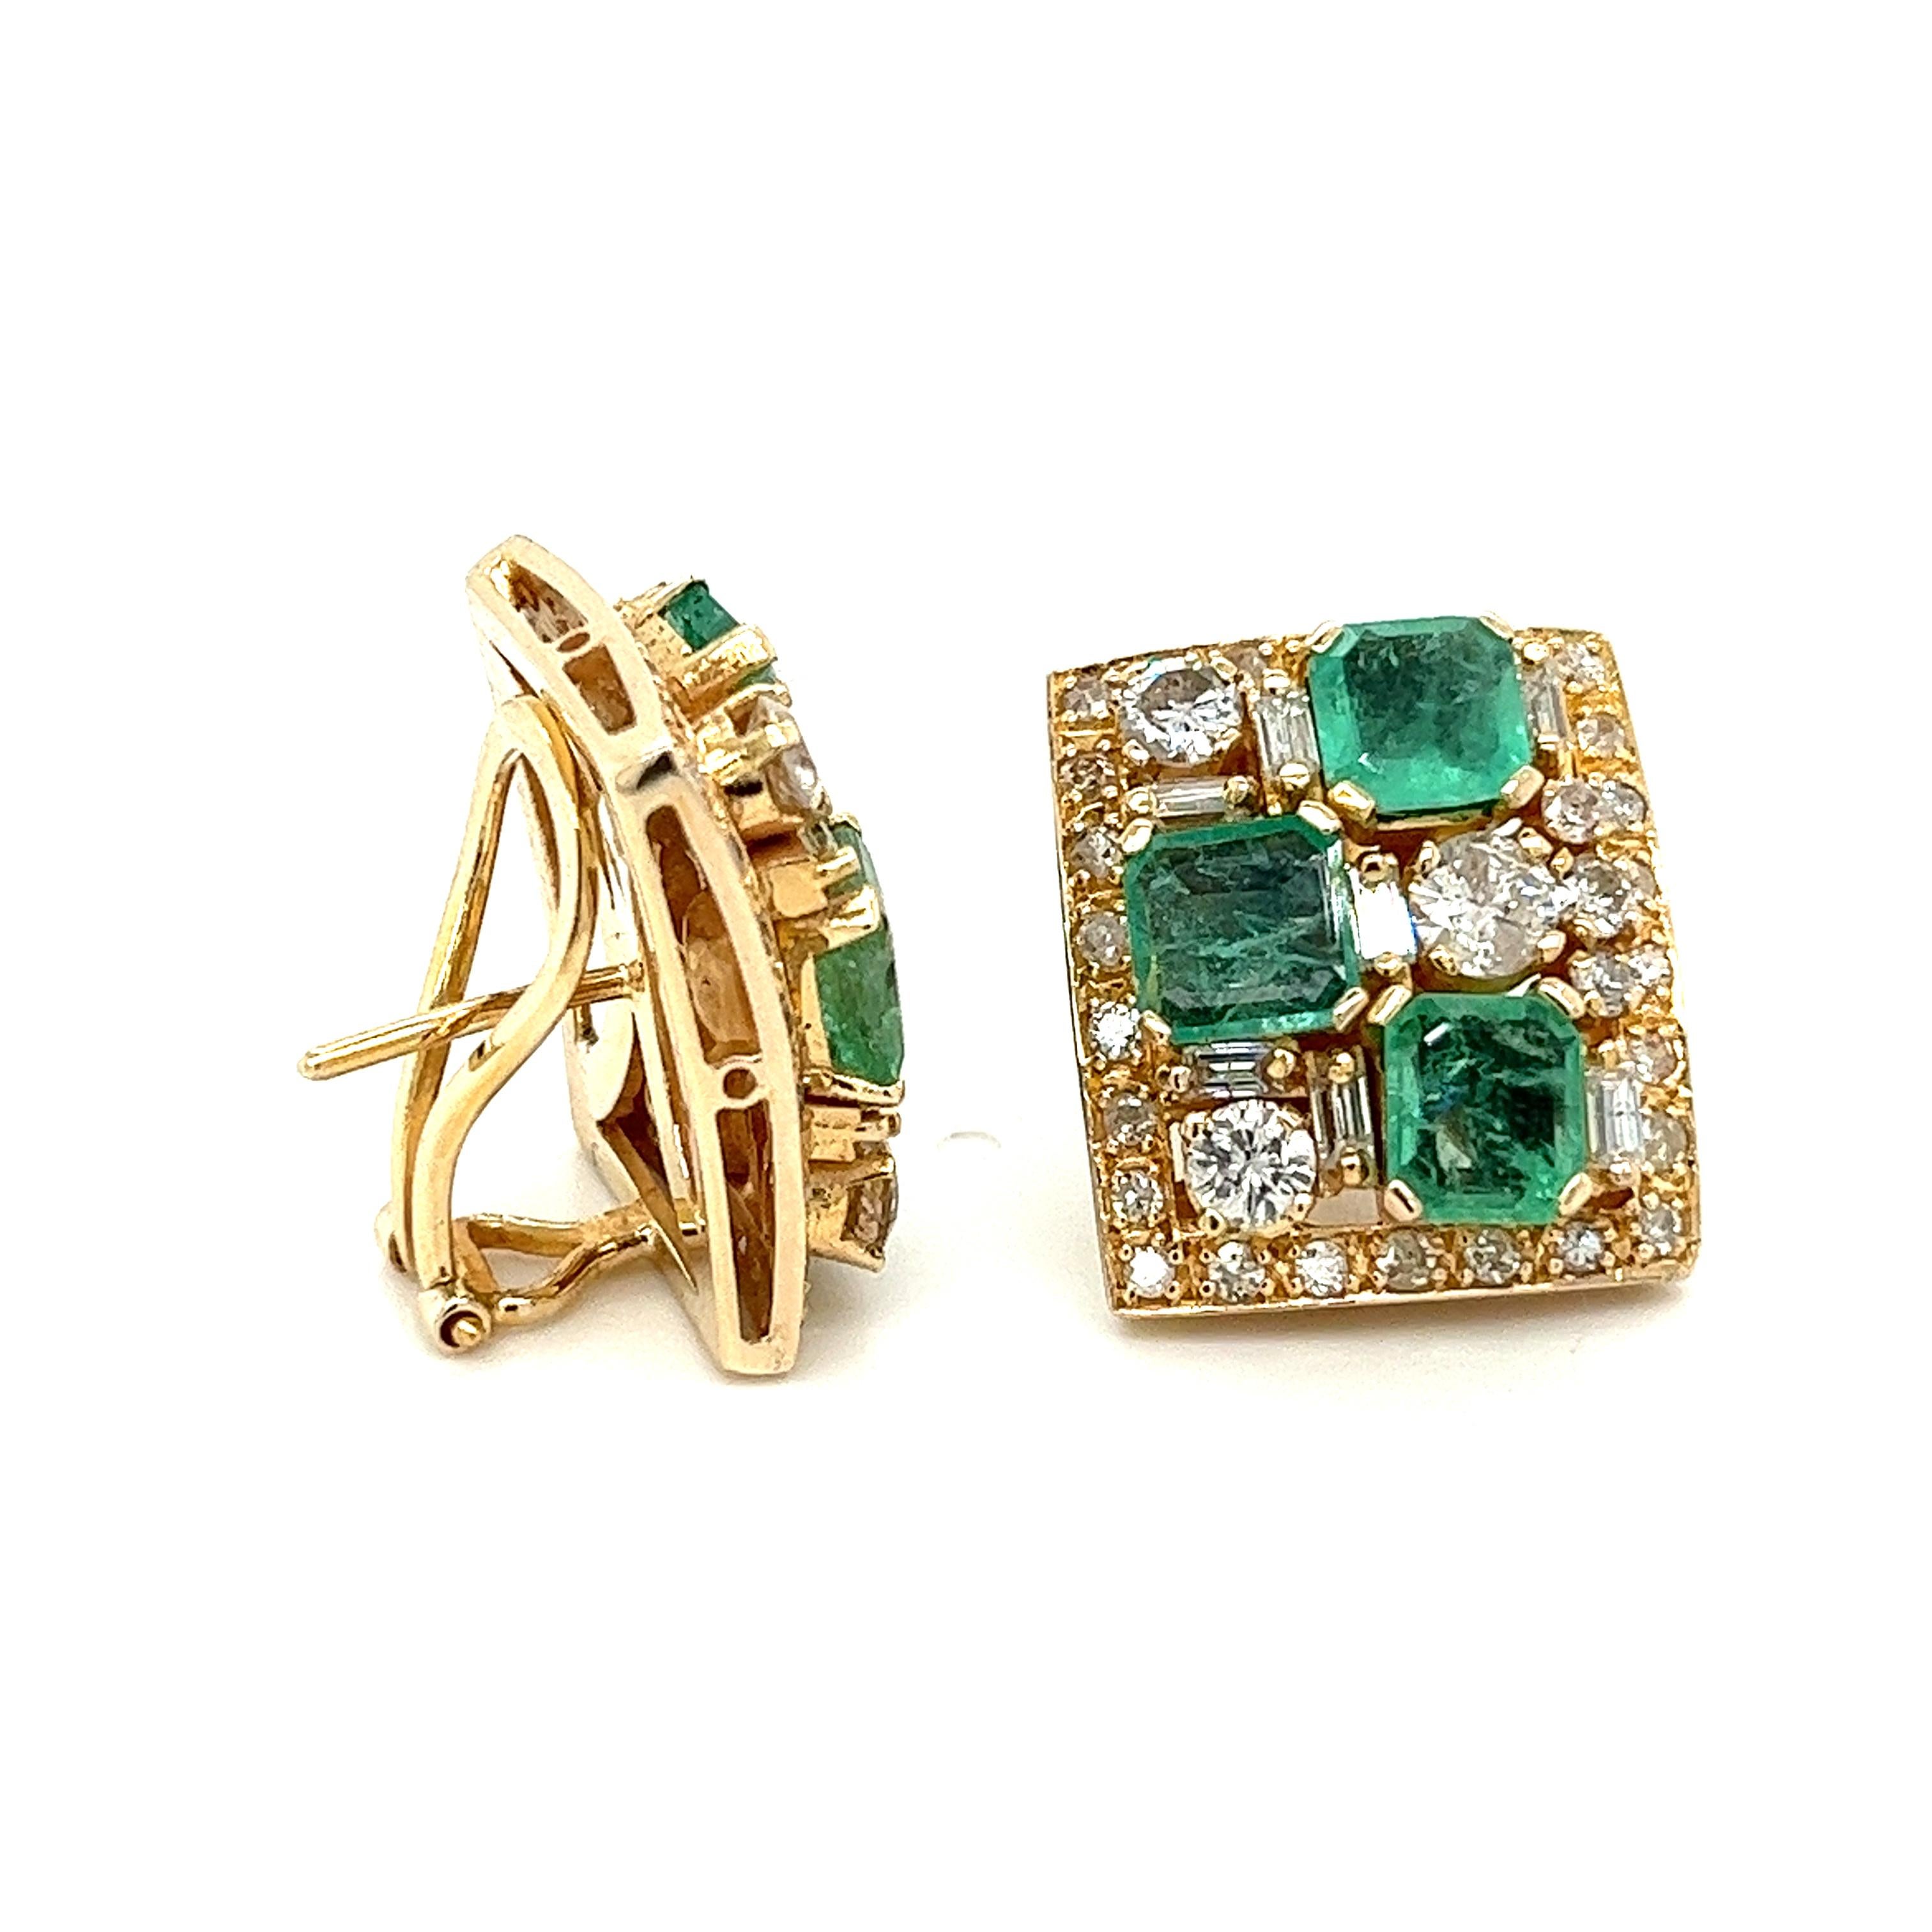 Vintage art deco inspired ring and earring set. Mounted with 12 carats in square cut natural emeralds and over  carats in baguette and round cut diamonds. Beautifully sorted with the quintessential symmetrical art deco pattern. A stunning array of